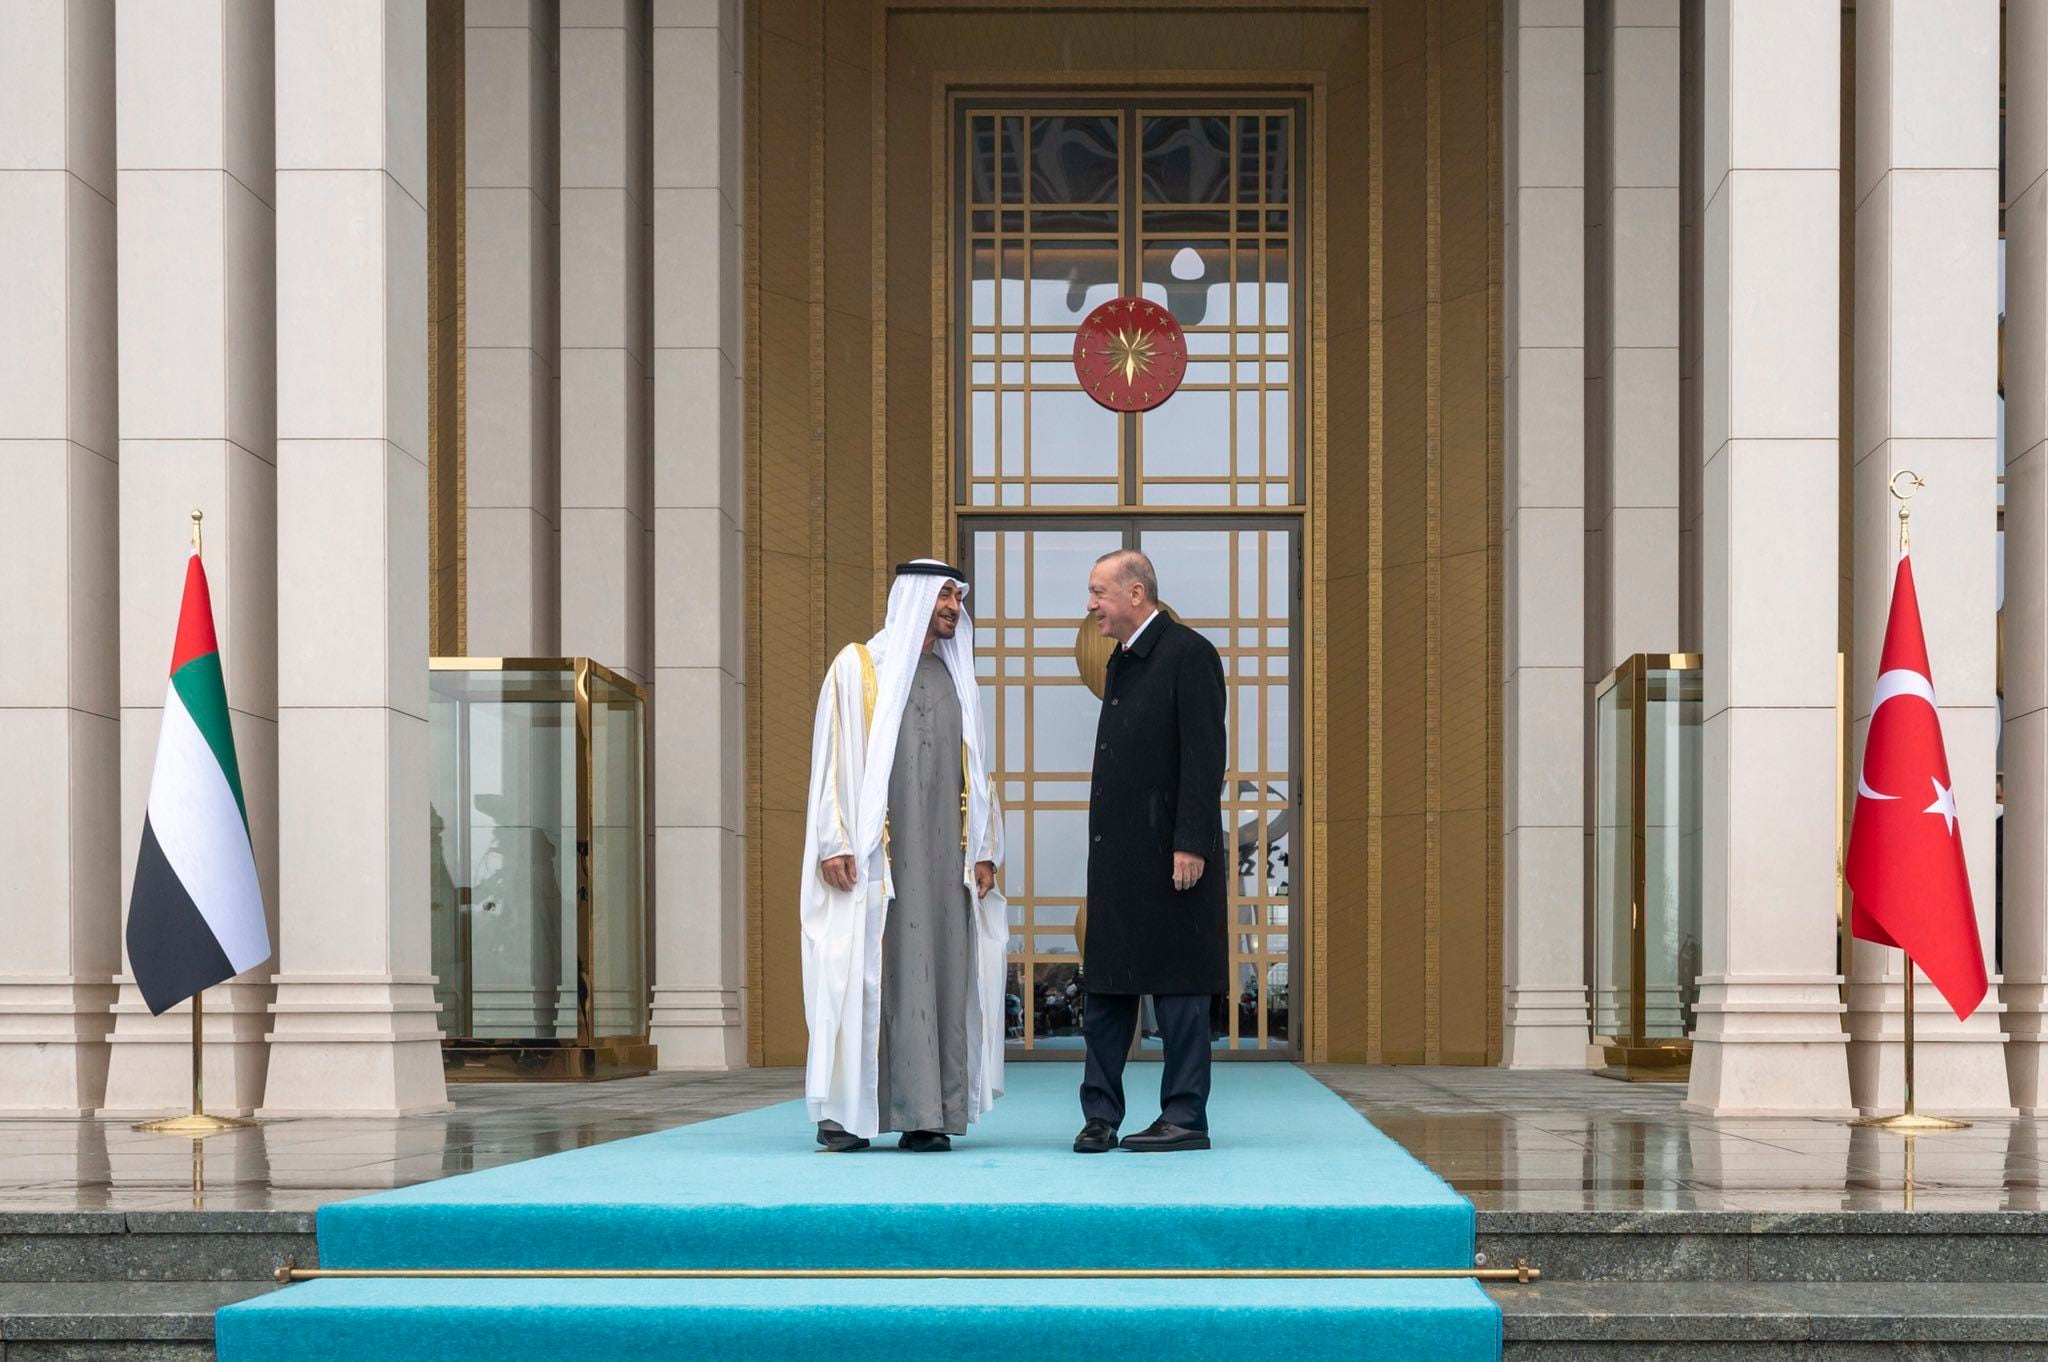 Sheikh Mohamed bin Zayed concludes trip to Turkey